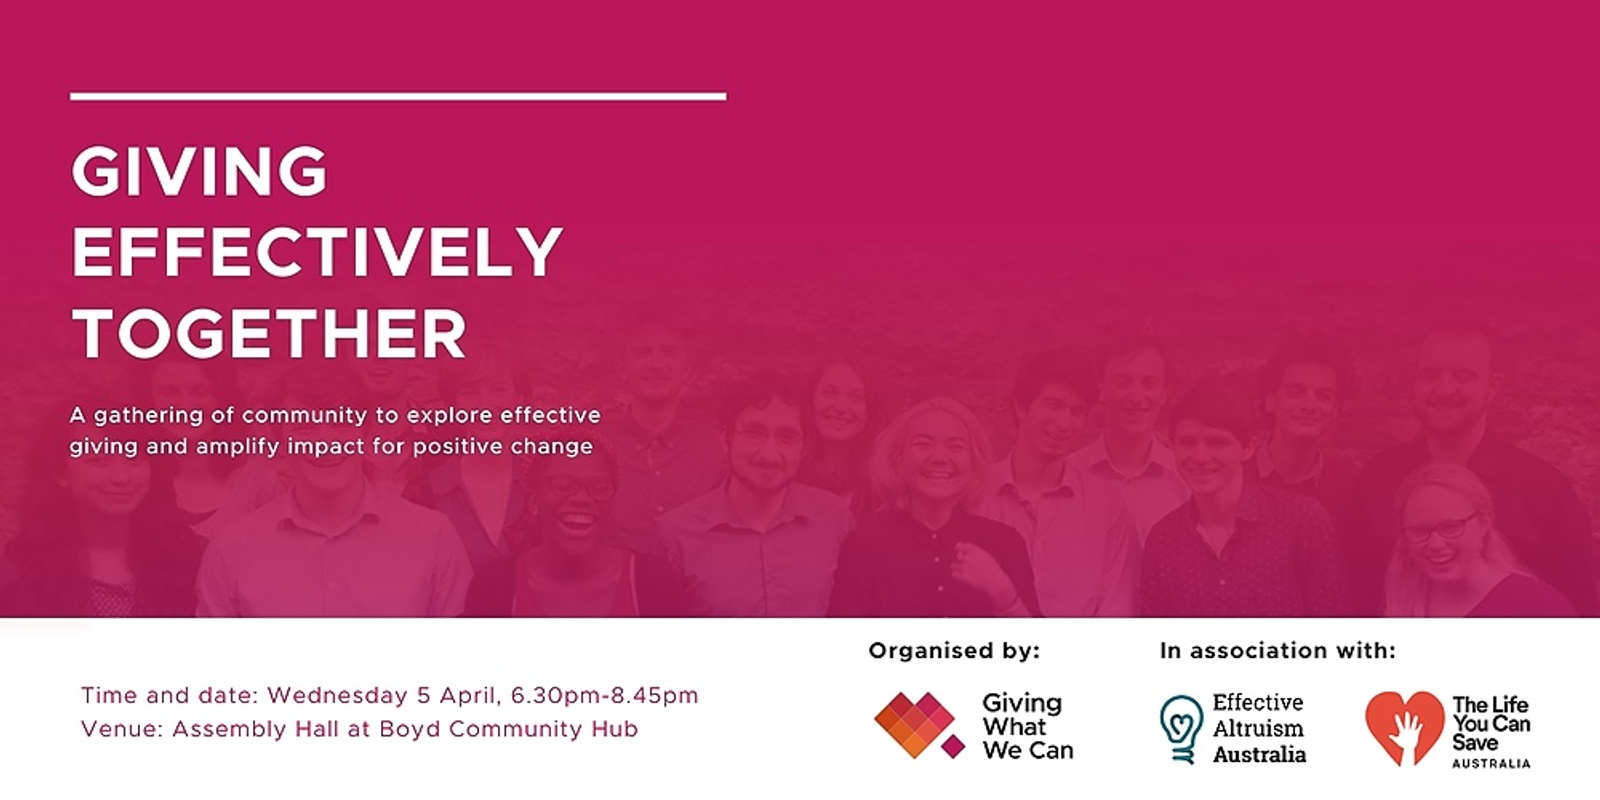 Banner image for Giving effectively together: A gathering of community to explore effective giving and amplify impact for positive change